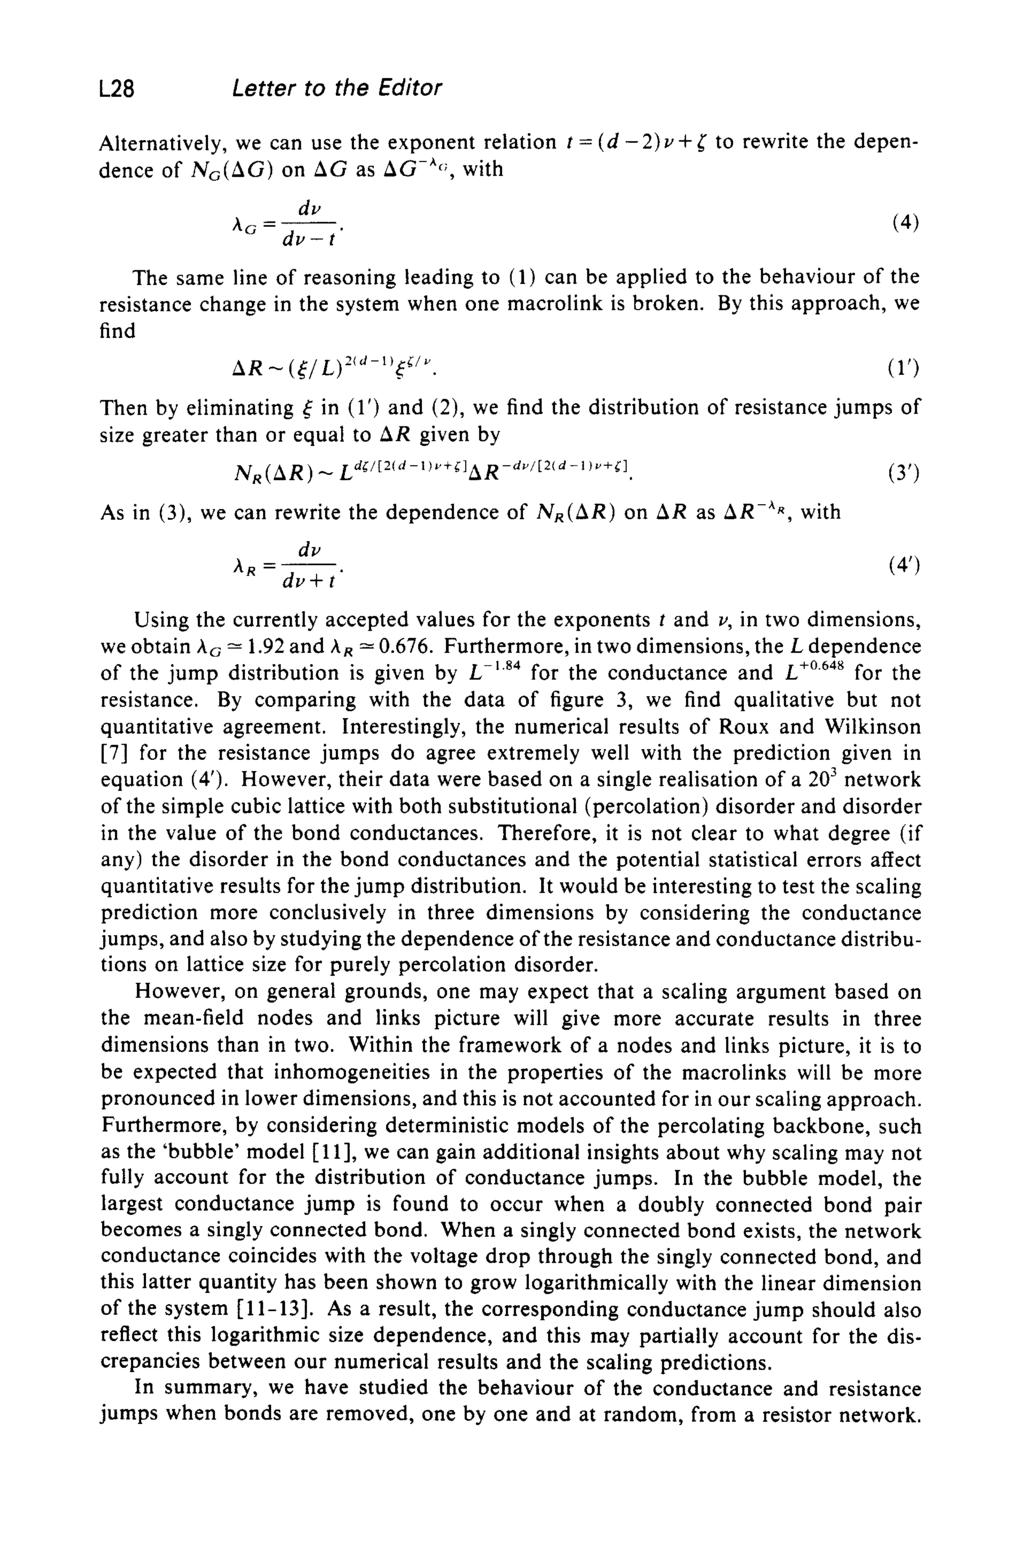 L28 Letter to the Editor Alternatively, we can use the exponent relation t = (d-2)v+ t to rewrite the dependence of N,(AG) on AG as AG-Ac;, with dv hg=-.